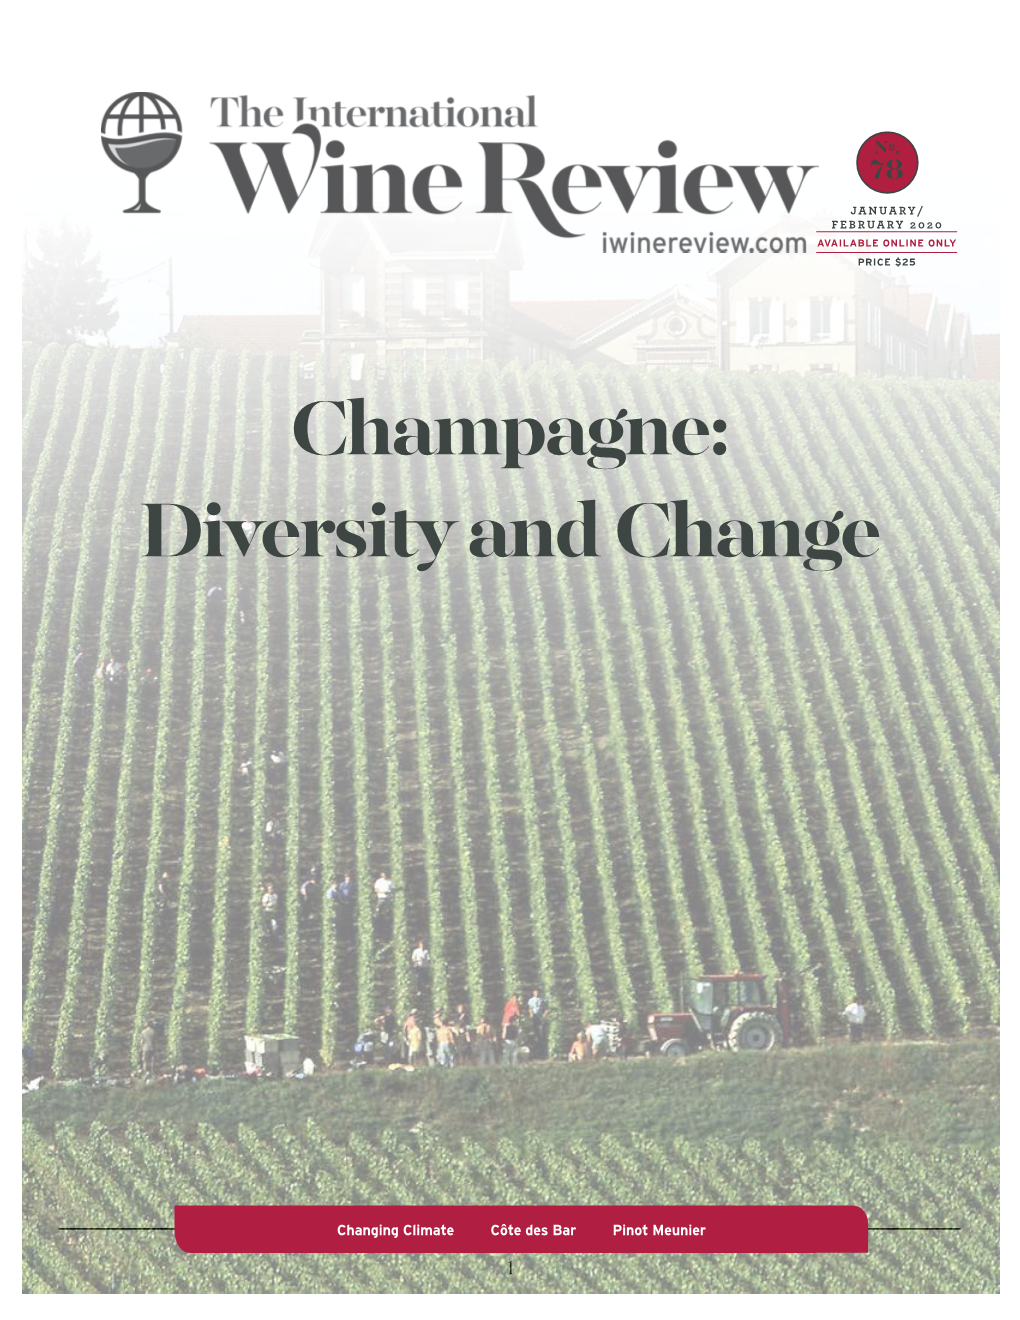 Champagne: Diversity and Change